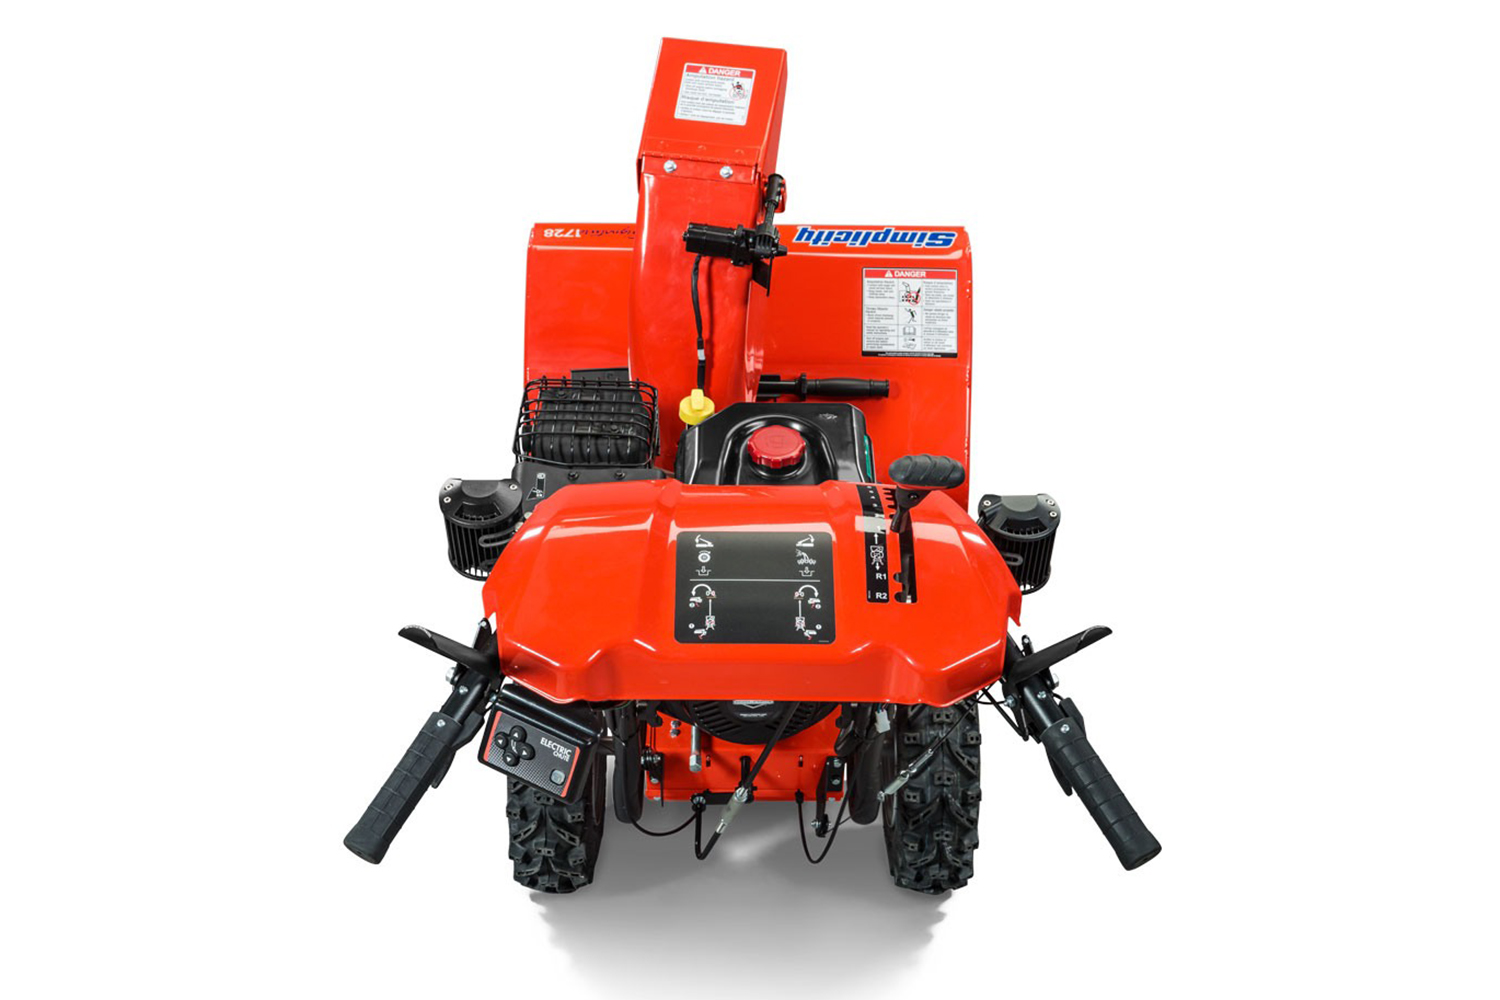 SIMPLICITY SIGNATURE SERIES DUAL-STAGE SNOW BLOWERS 1728<br/>*Model shown in image may vary.